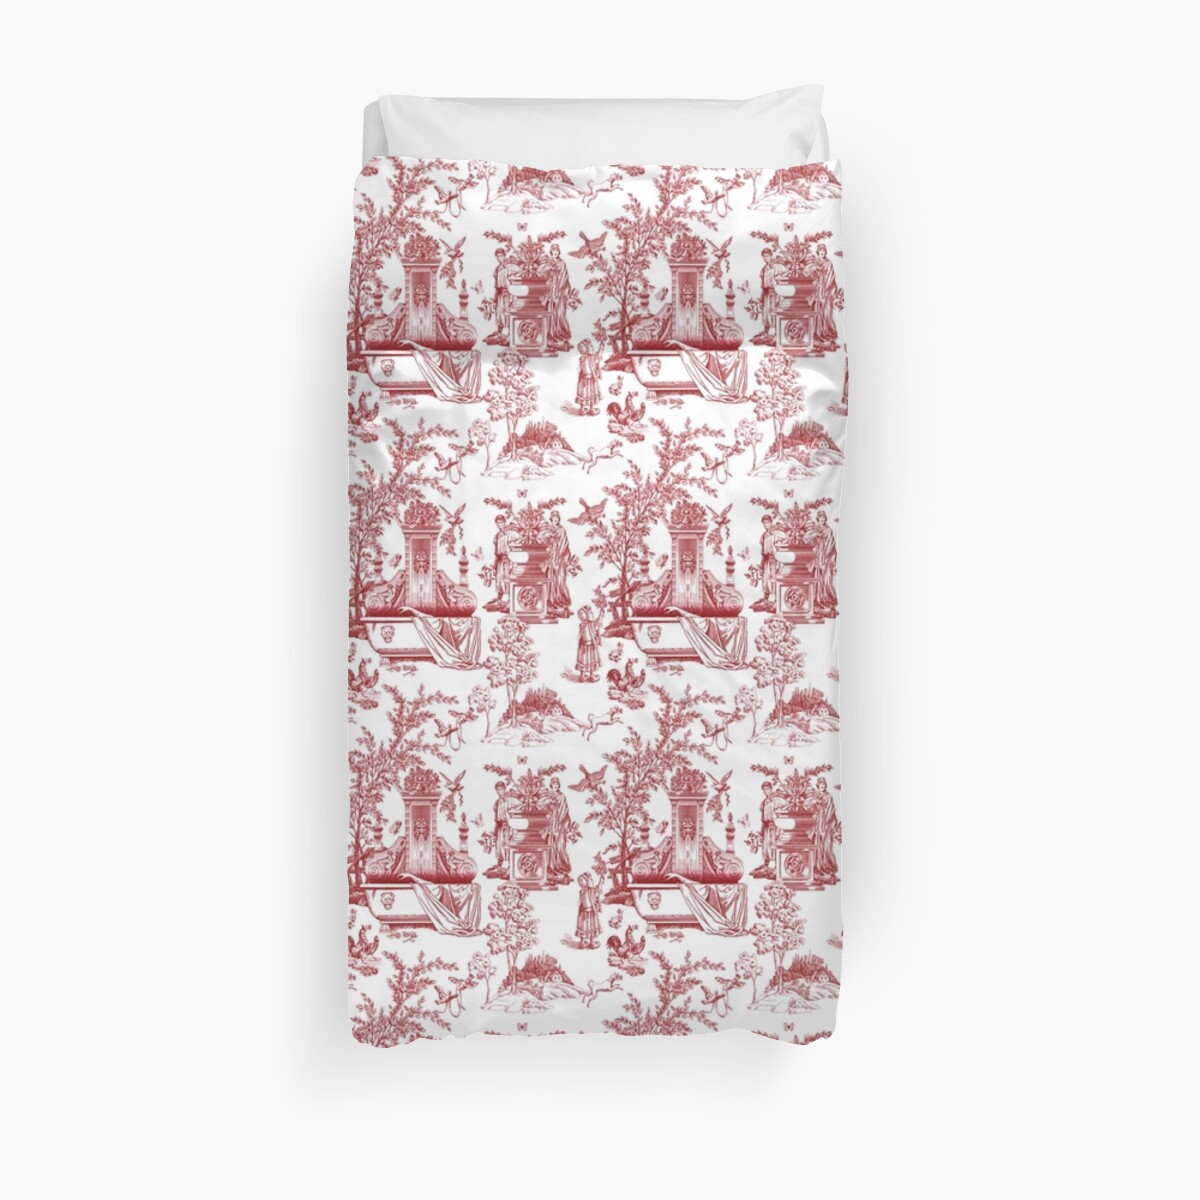 Red Toile Pattern Design Duvet Cover By Thebeststore Redbubble